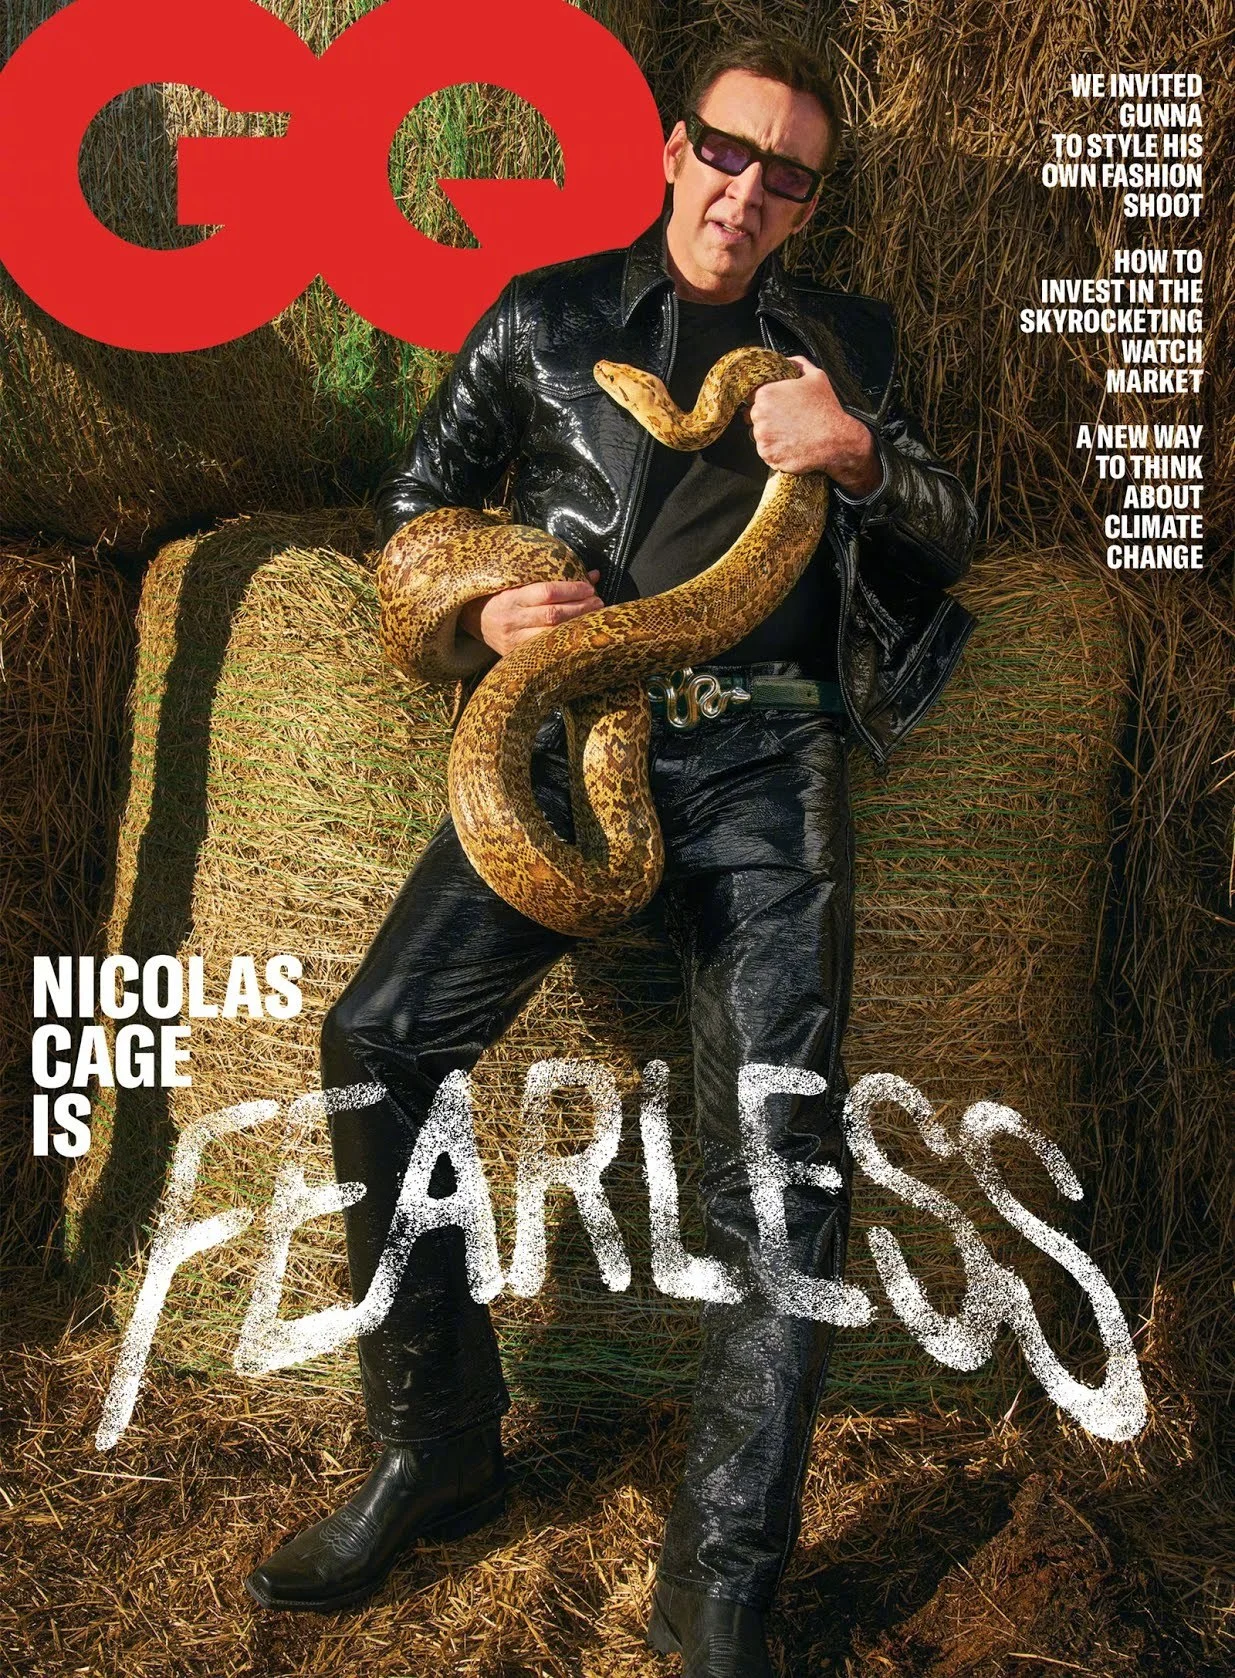 Nicolas Cage on the cover of the April issue of GQ magazine